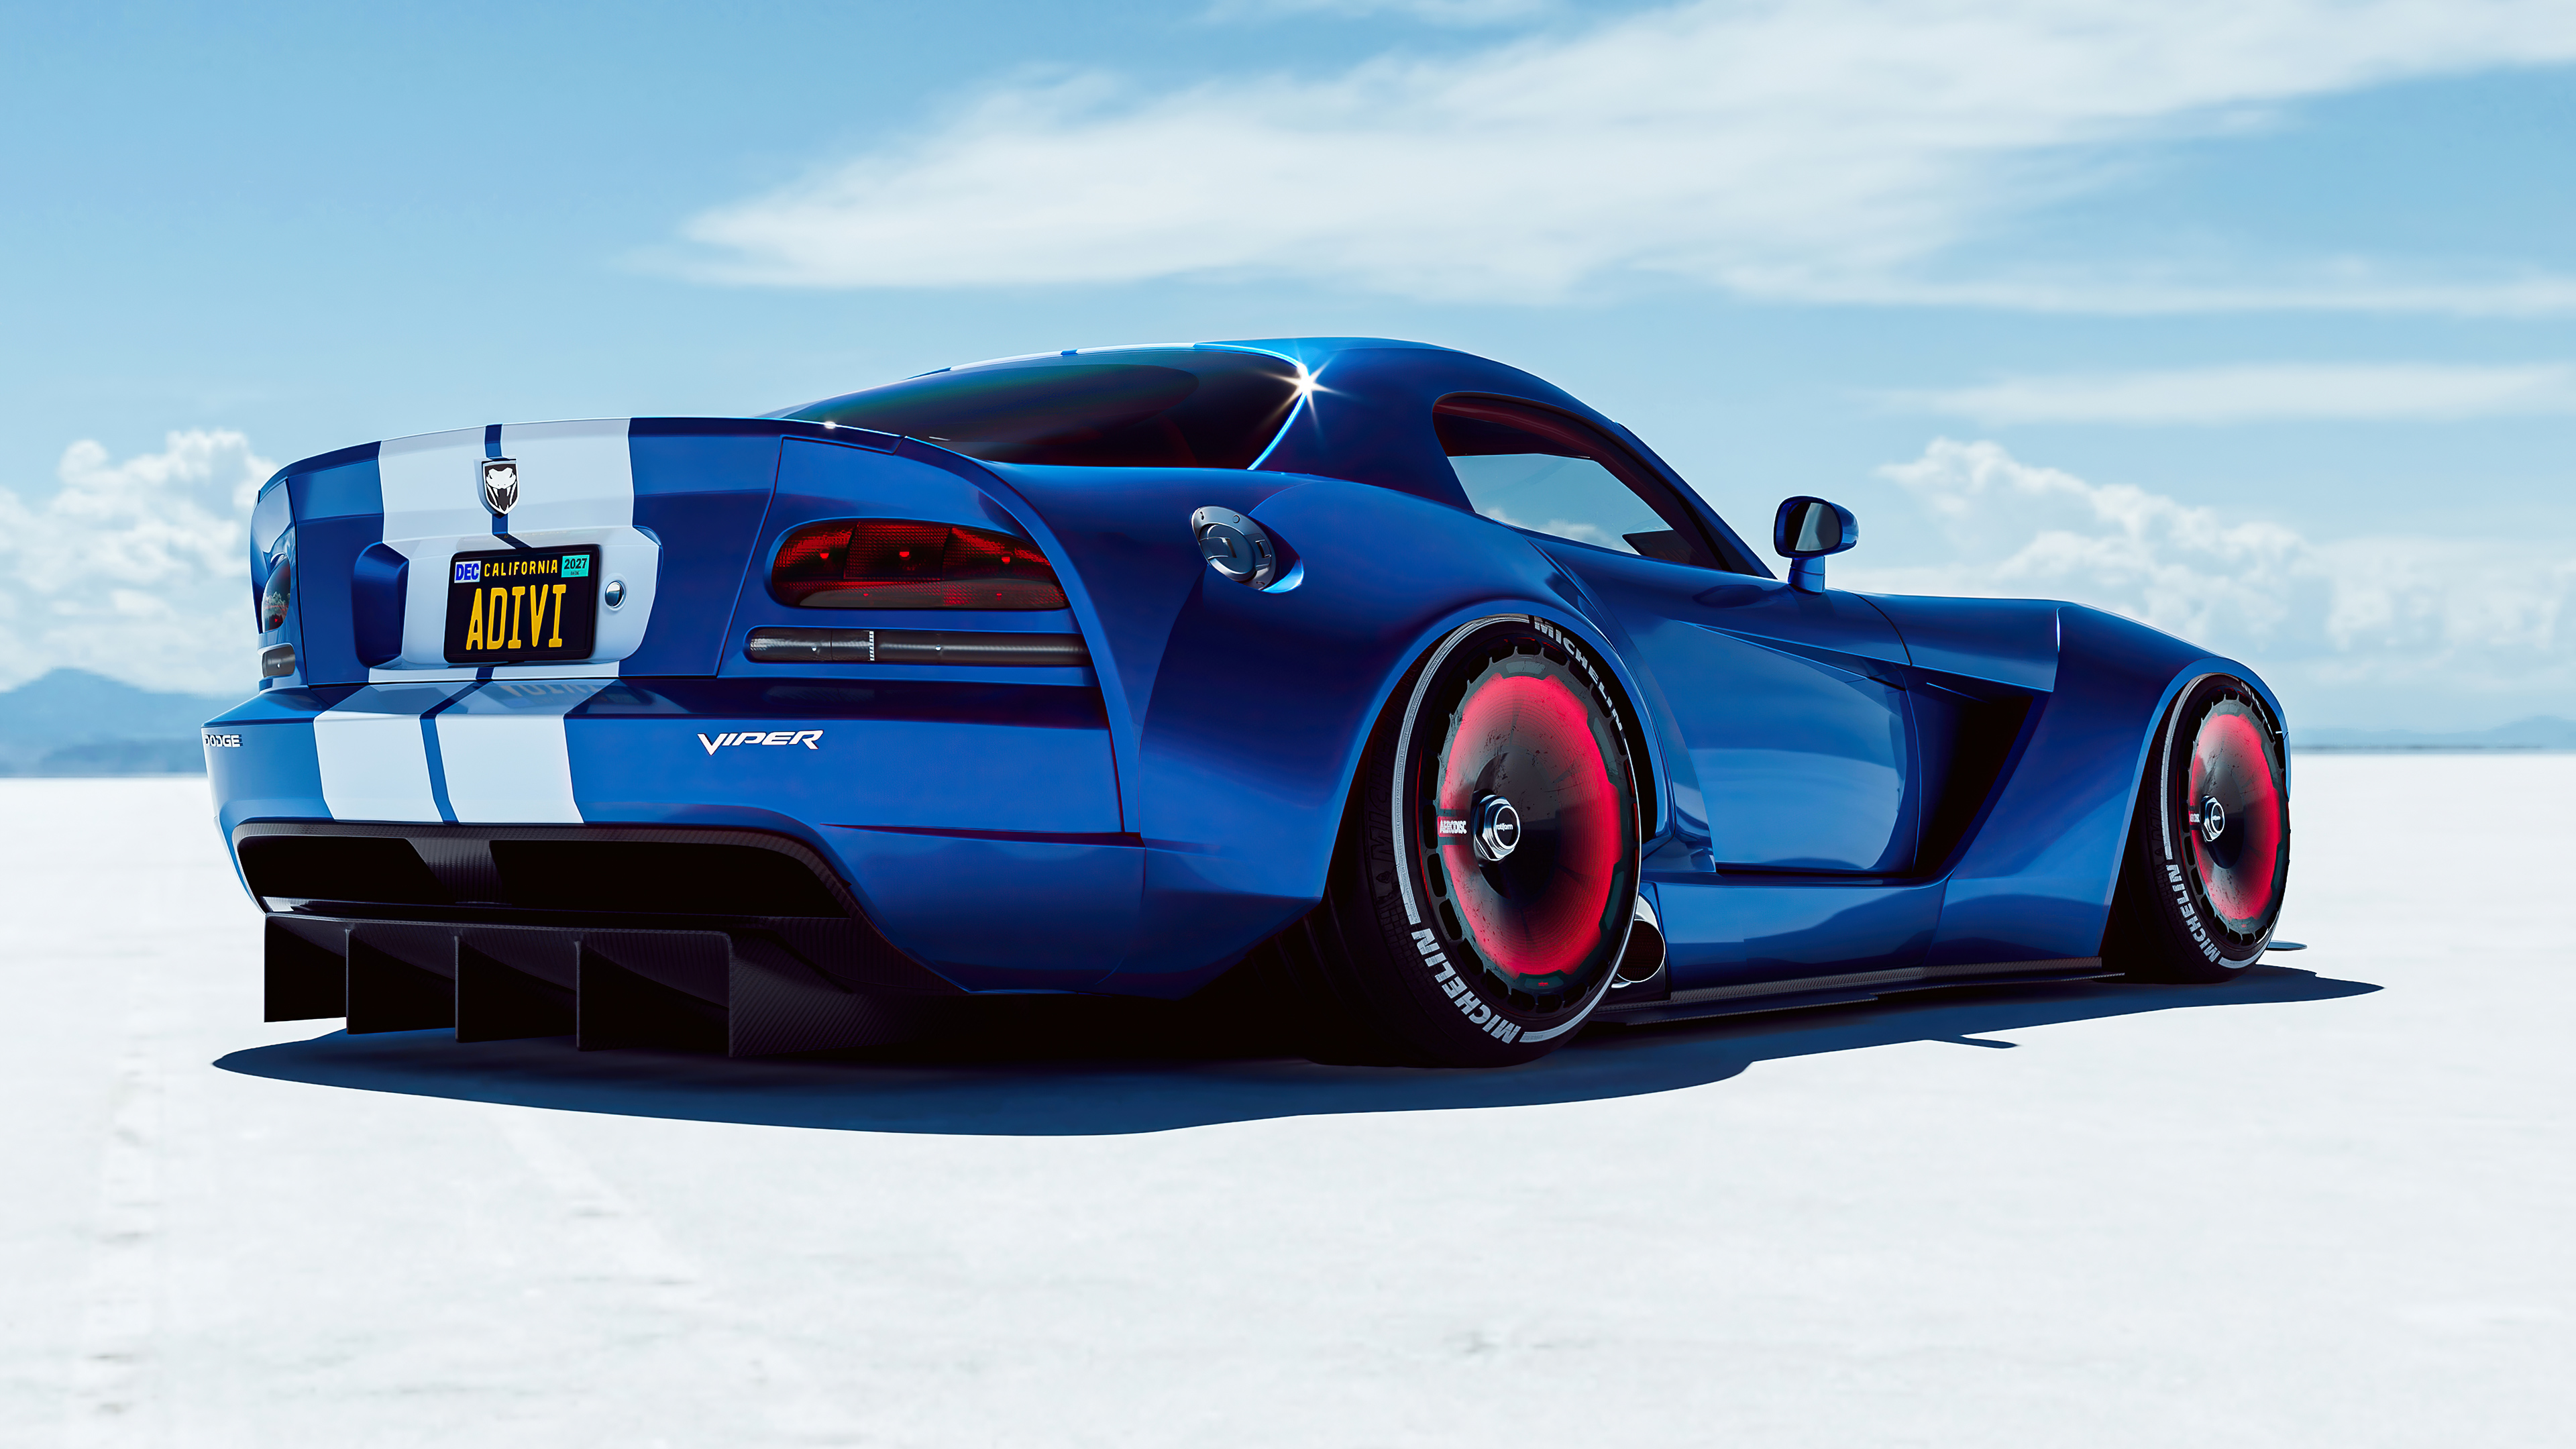 Free photo Blue Dodge Viper supercar with white stripes on the trunk